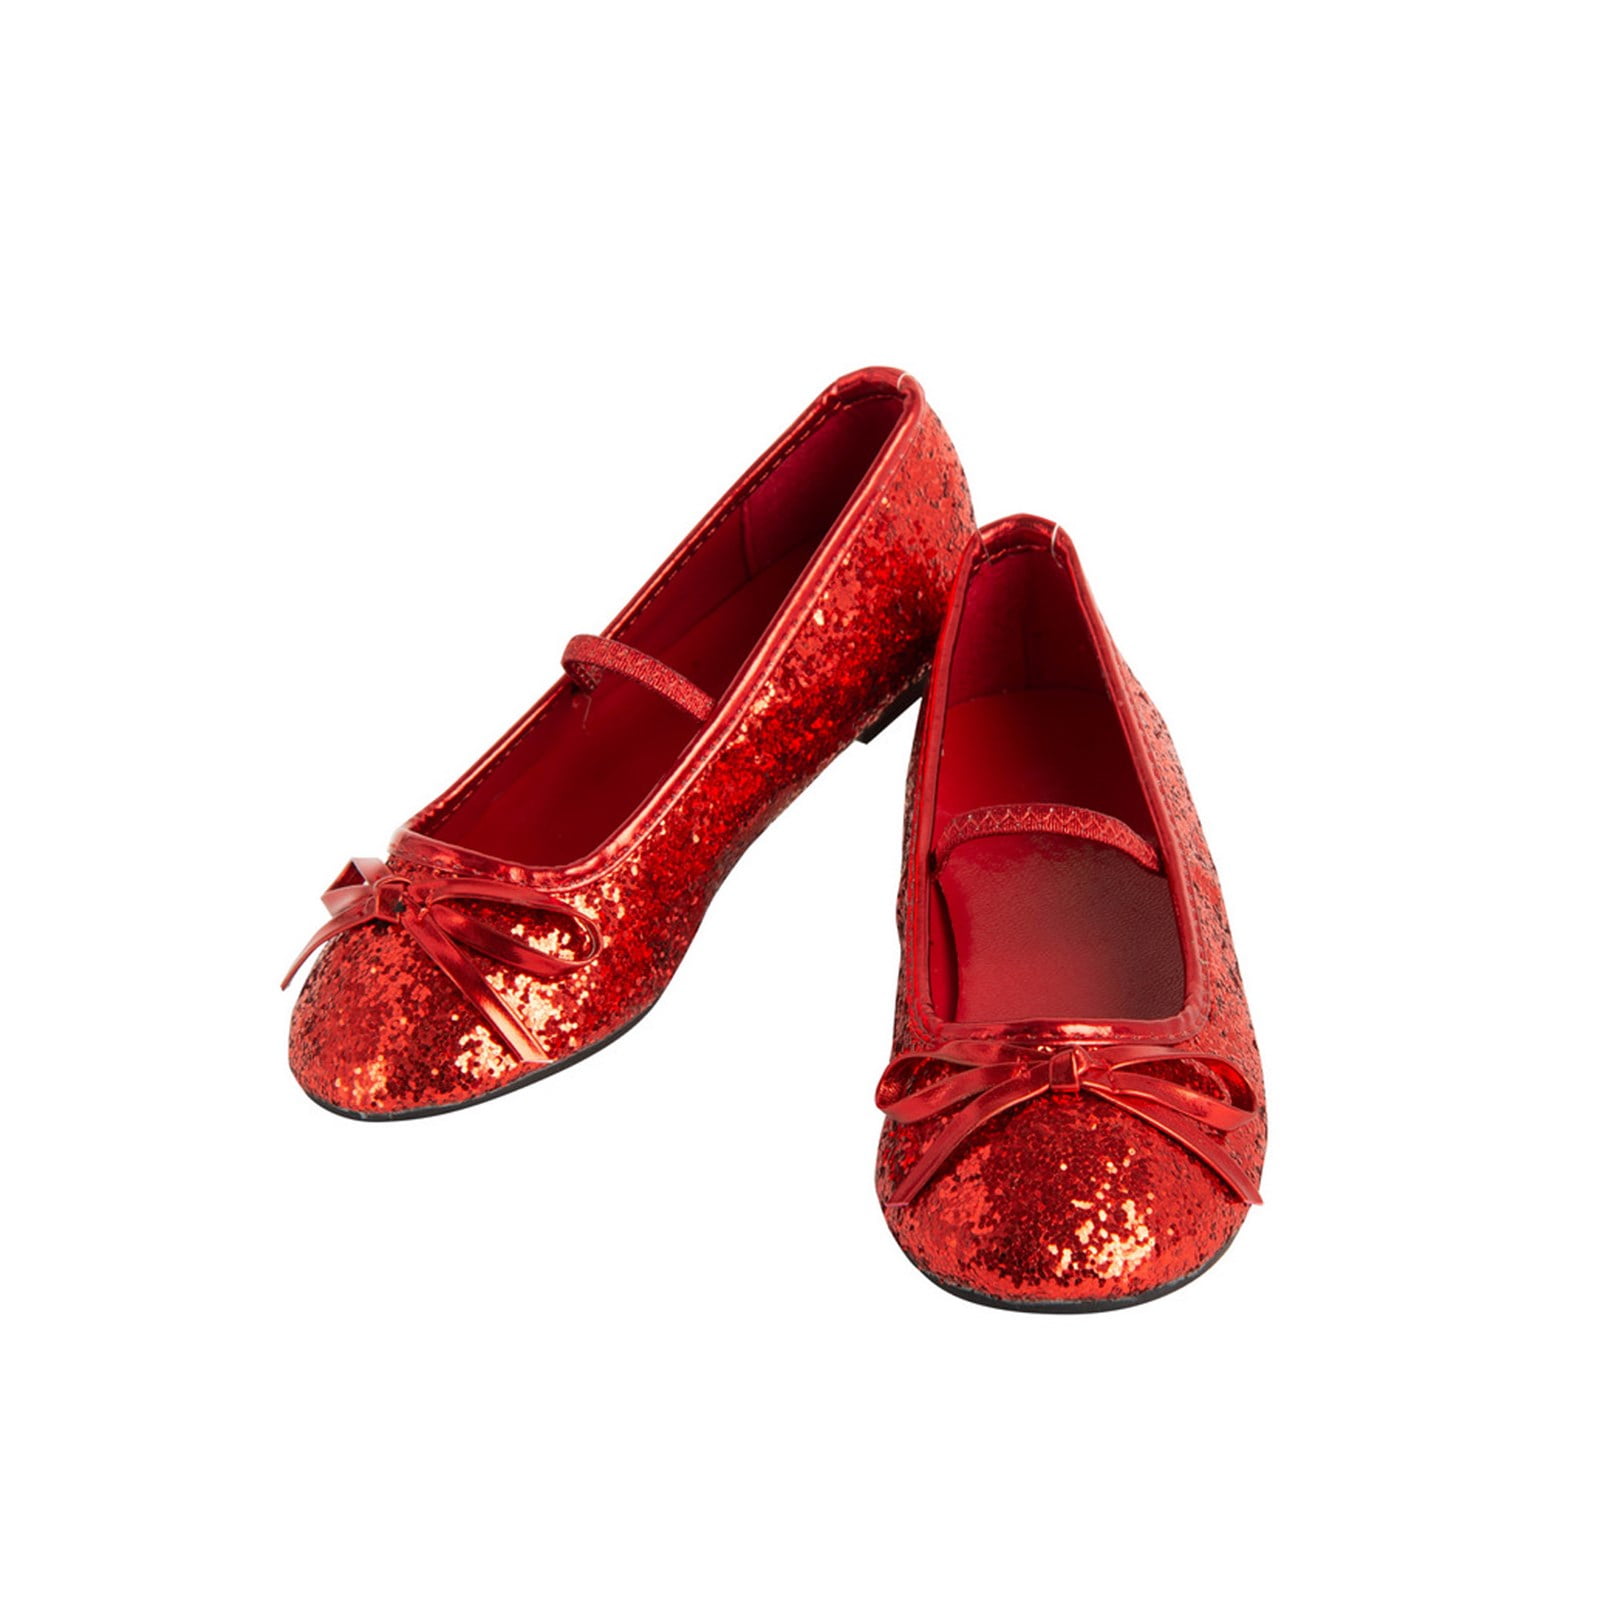 DOROTHY Shoes Pump Red Sequin Ruby Dress Up Halloween Adult Costume Accessory 